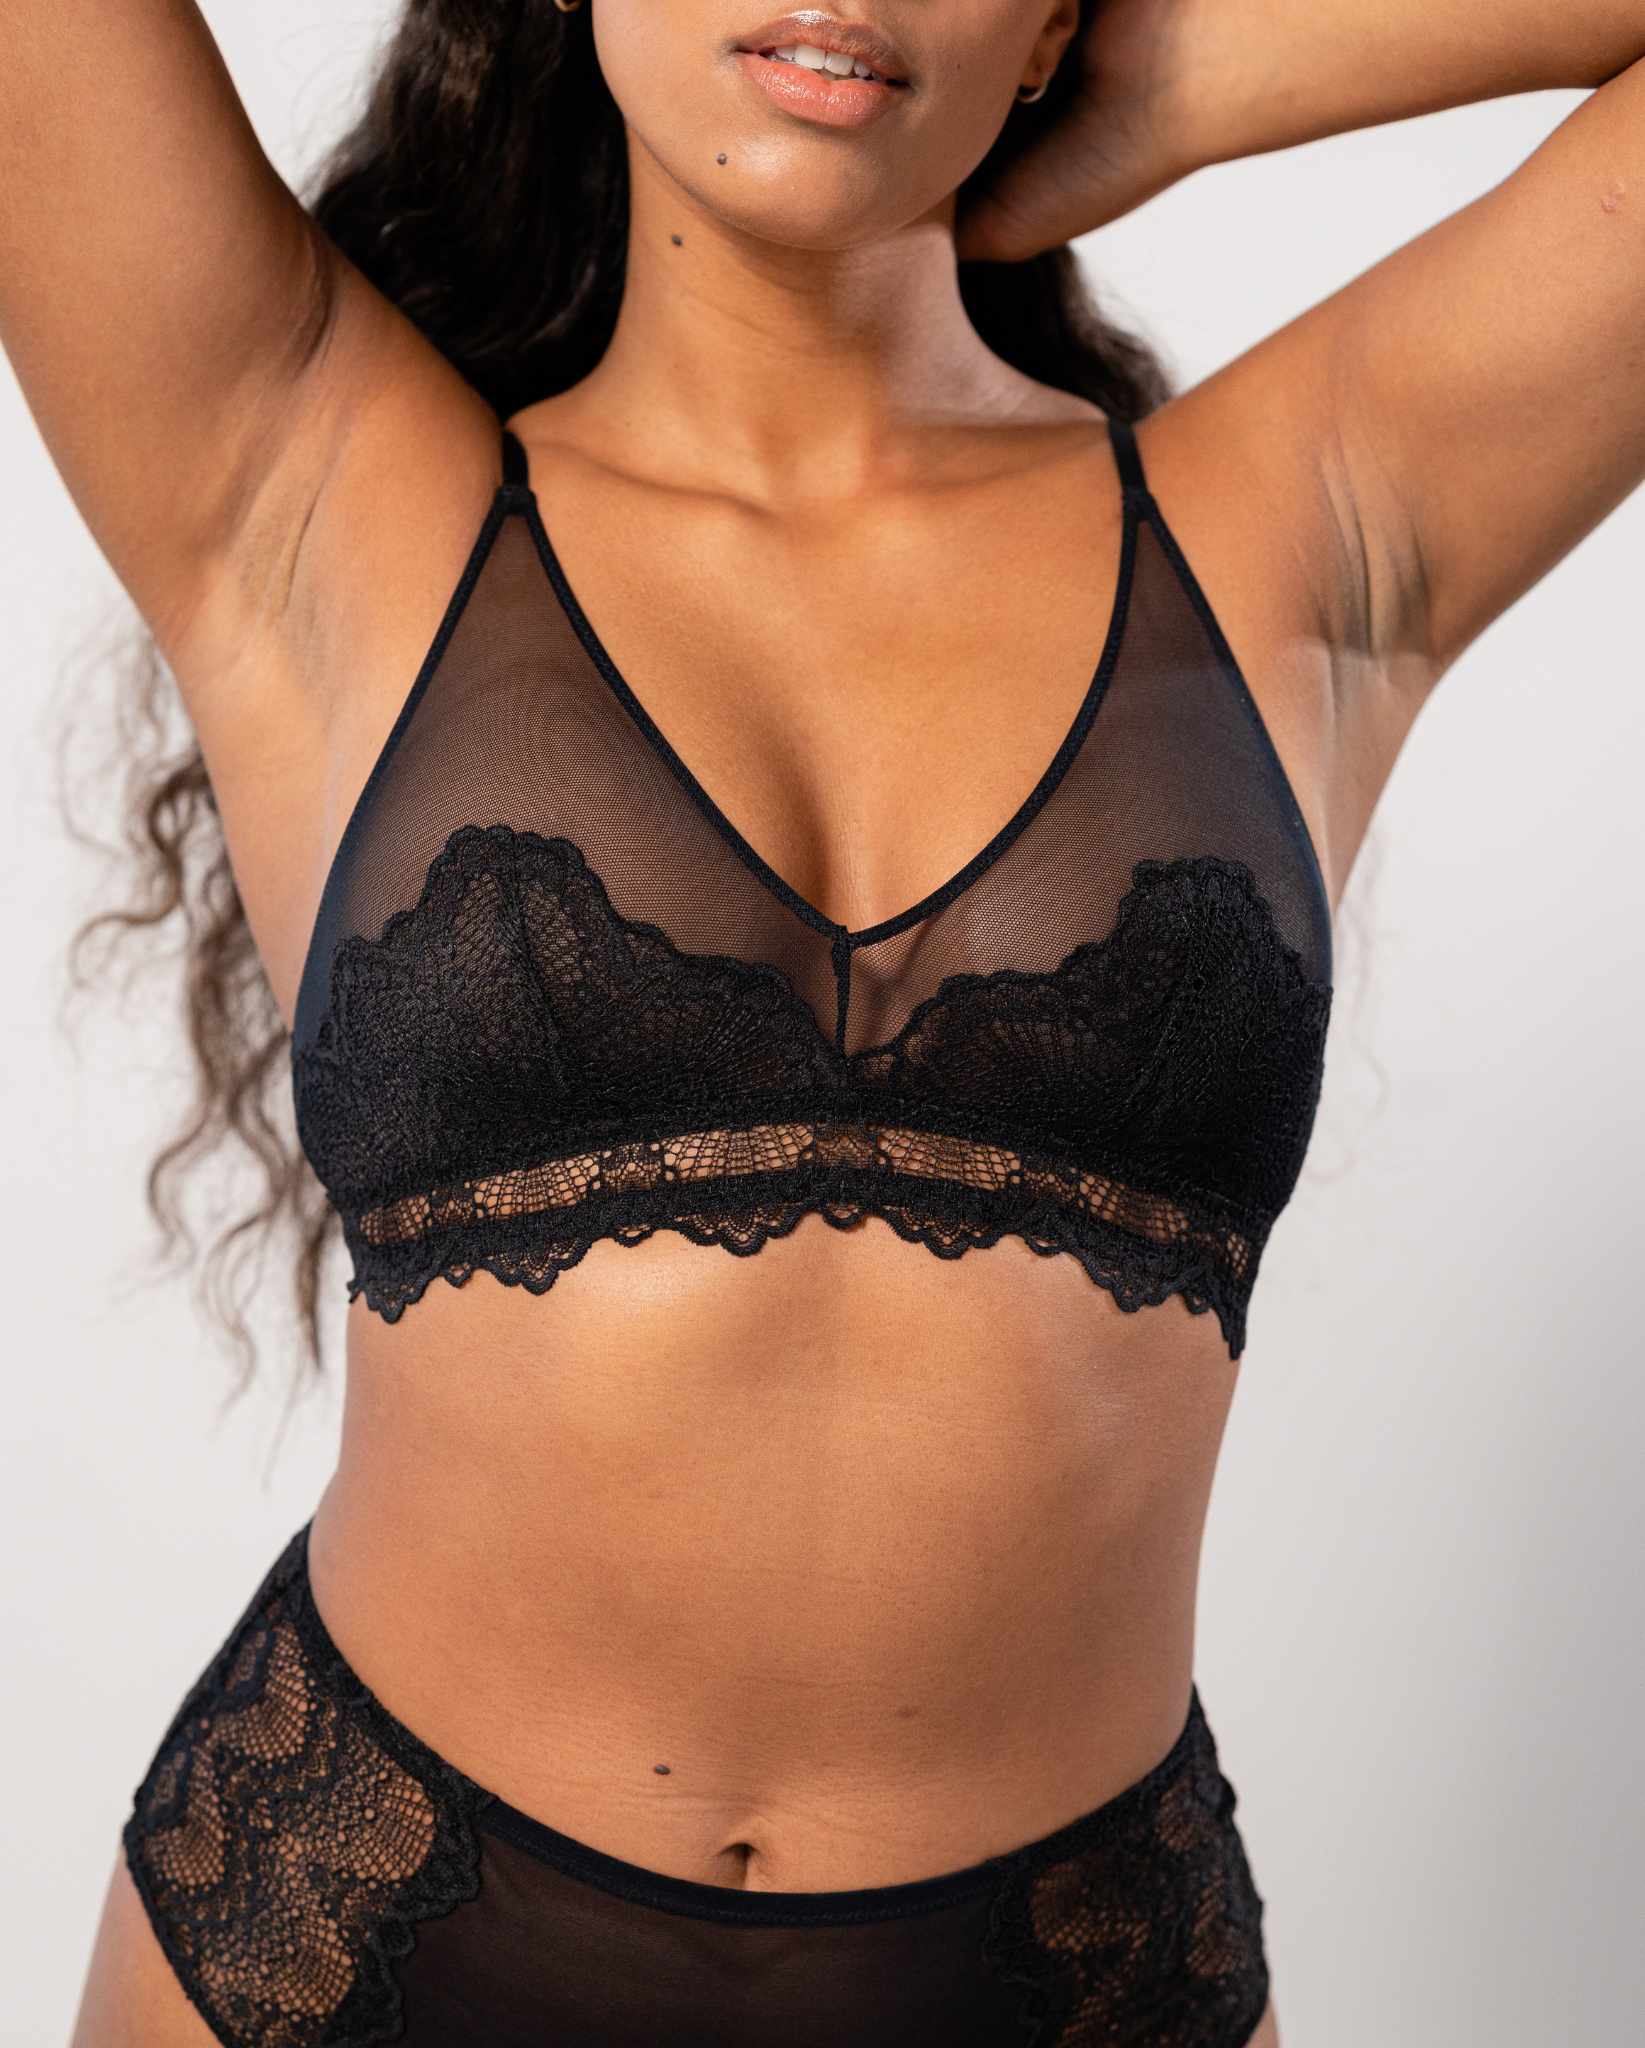 Sheer Lingerie Set includes lace bralette with sheer mesh triangle